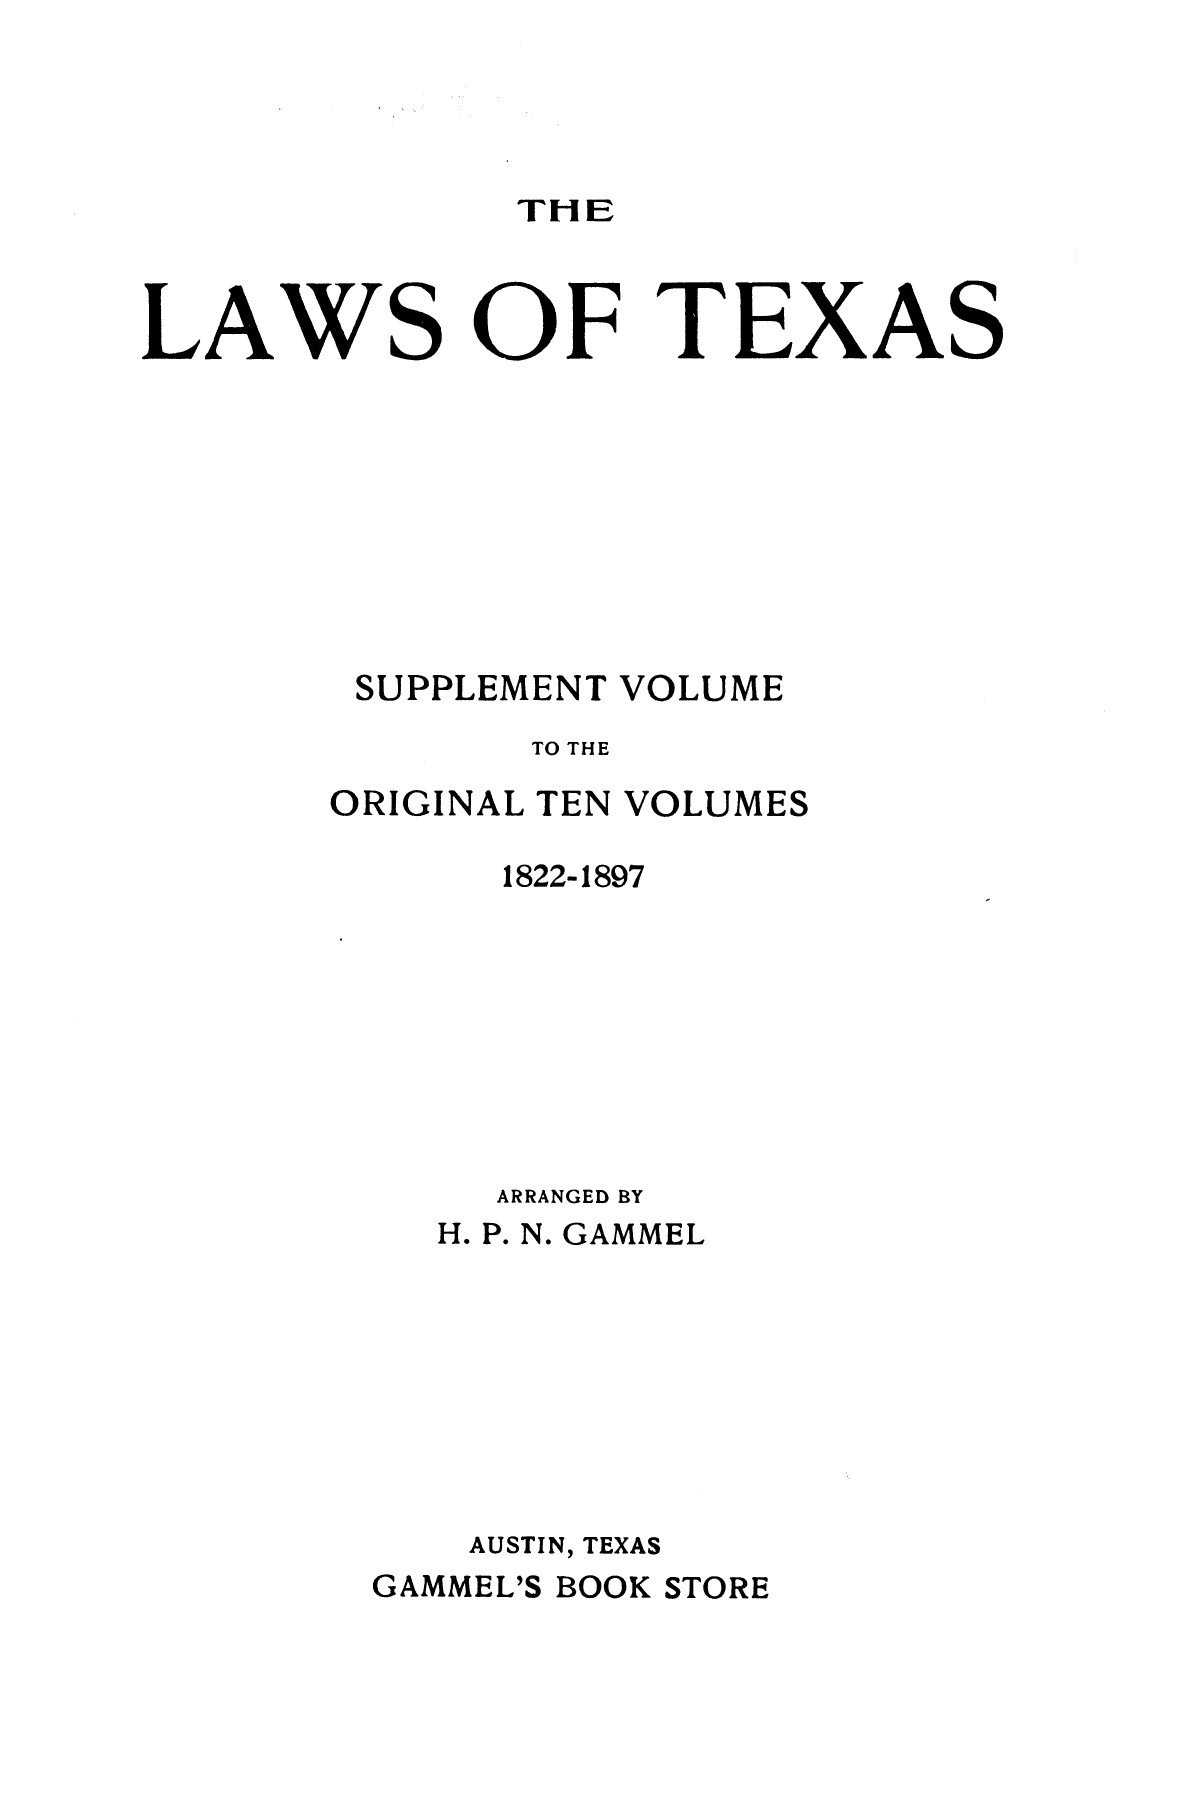 The Laws of Texas, 1903-1905 [Volume 12]
                                                
                                                    [Sequence #]: 1 of 1968
                                                